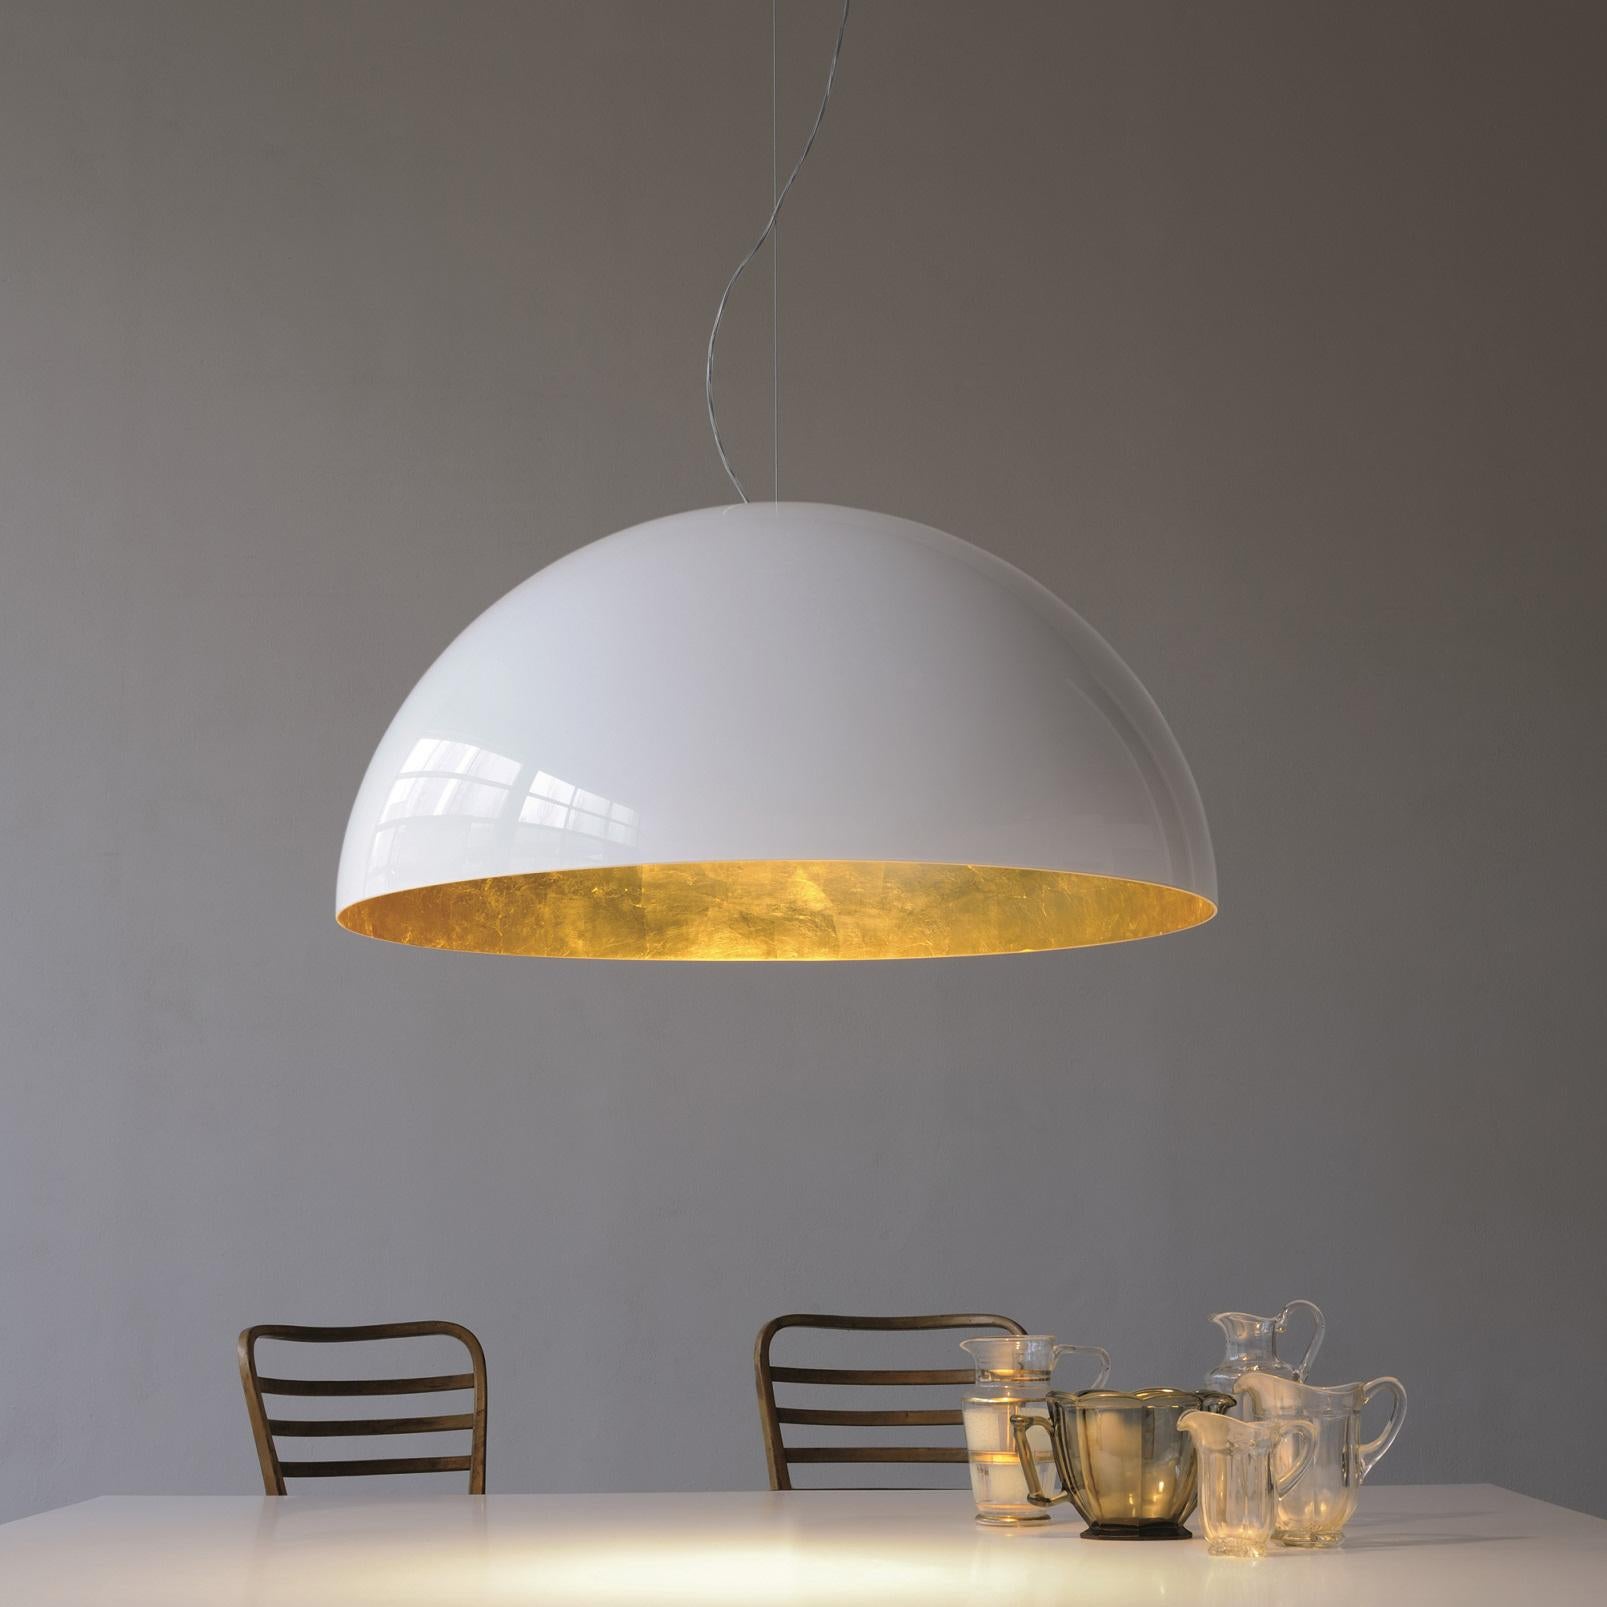 Italian Vico Magistretti Suspension Lamp 'Sonora' White Outside and Gold Inside by Oluce